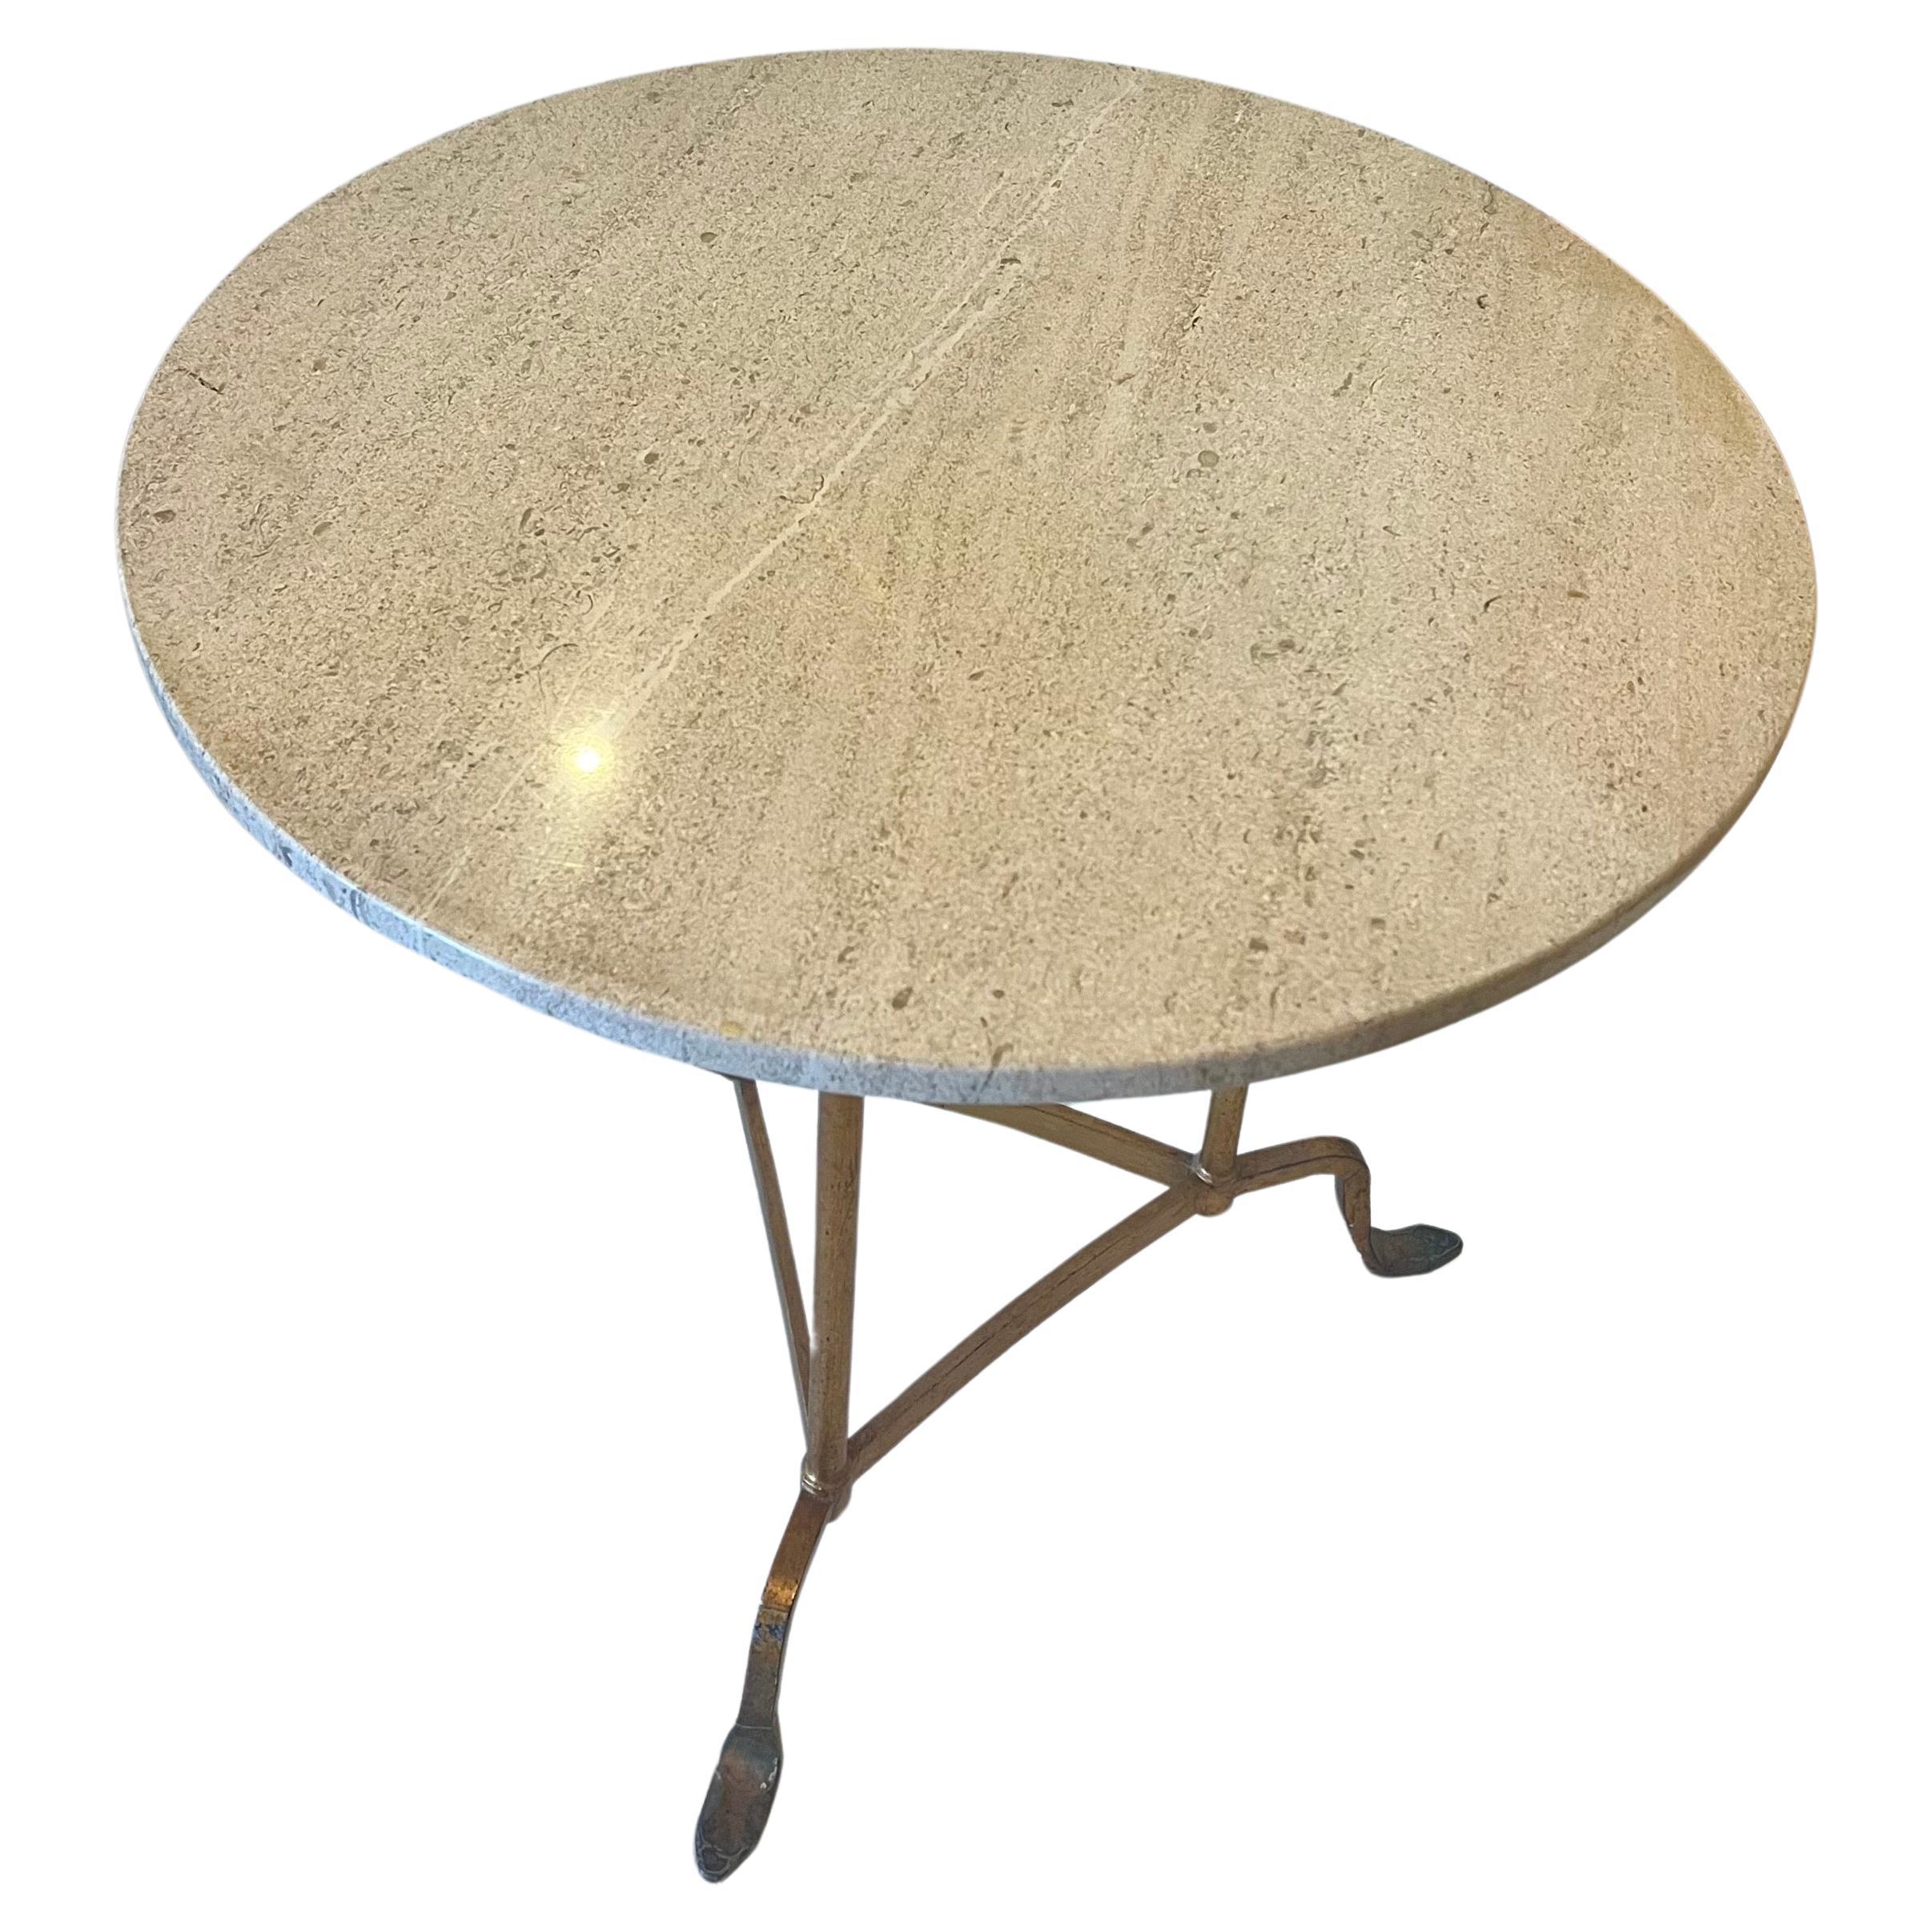 Title: Vintage Hollywood Regency Style Cocktail Table - Exquisite Elegance from the 1950s

Description:
Indulge in the timeless allure of Hollywood Regency with this stunning cocktail table, a true gem reminiscent of the glamour and sophistication